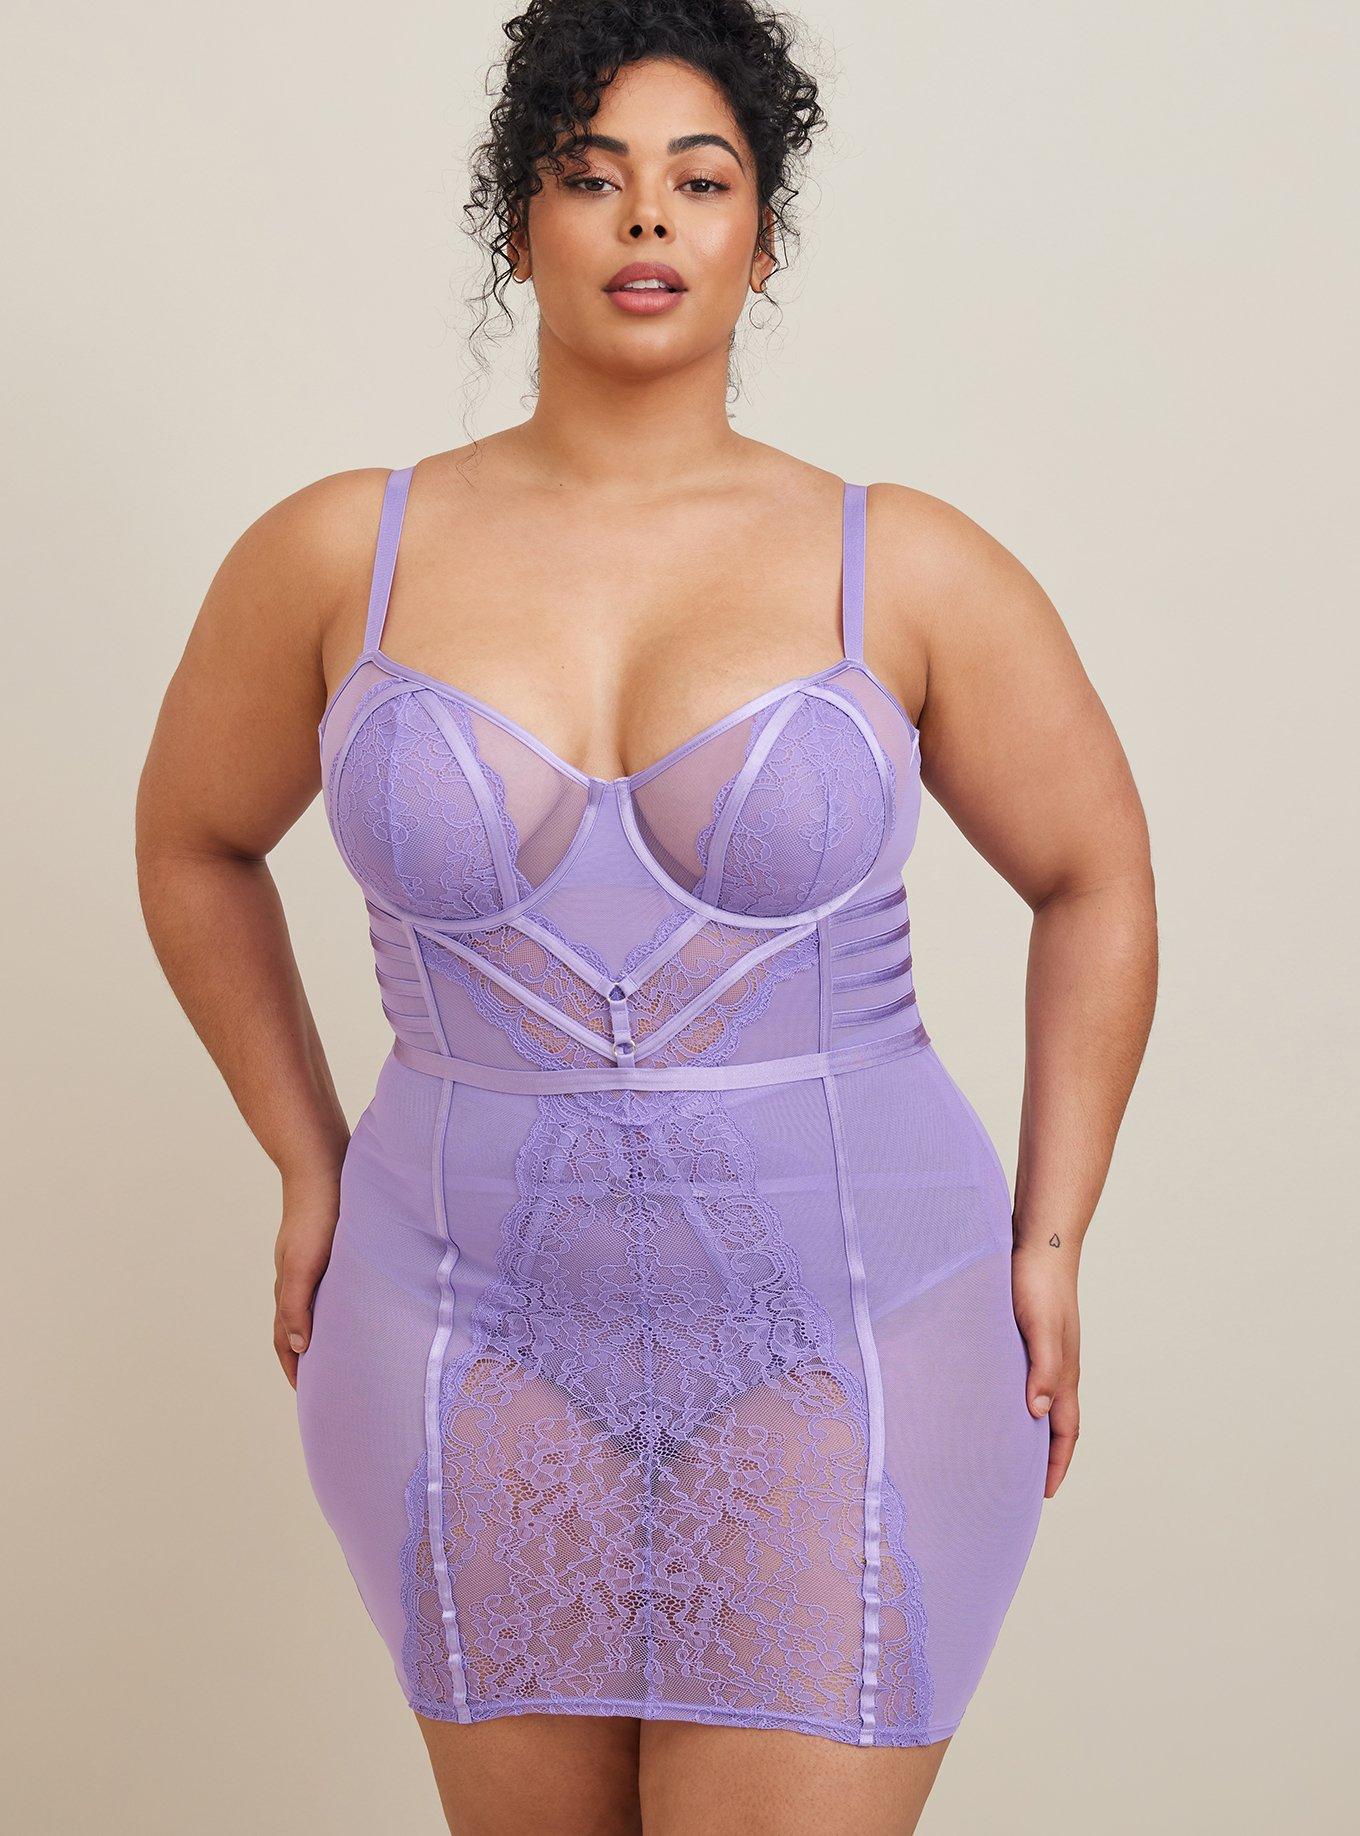 Plus Size - Straps And Lace Chemise - Torrid